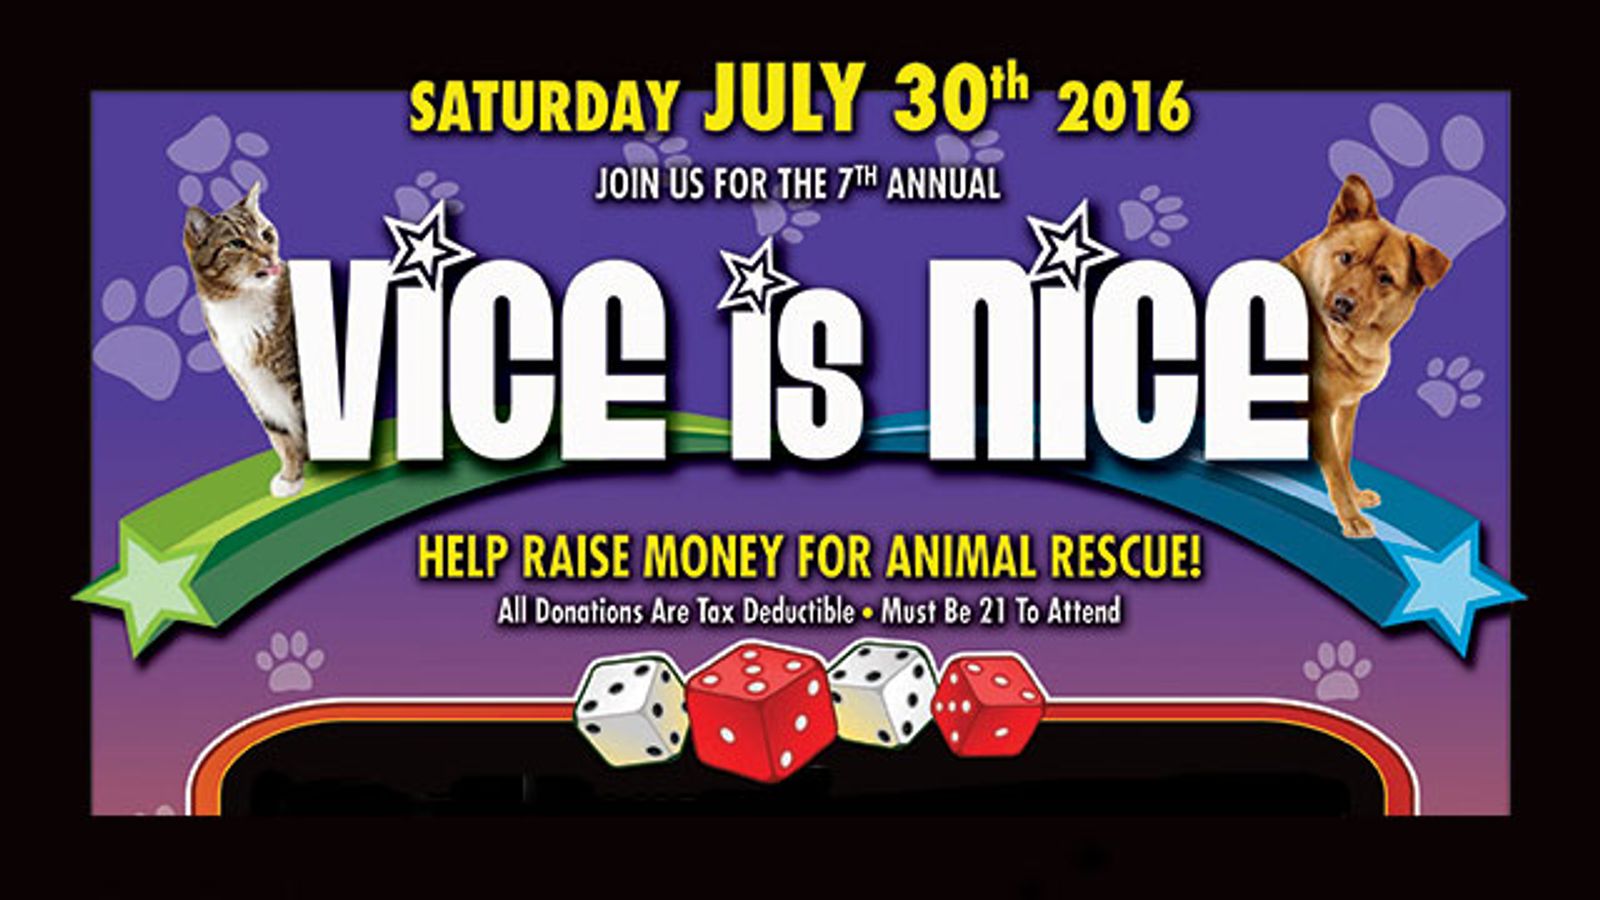 Lucky 7th Vice Is Nice Fundraiser Takes Place July 30